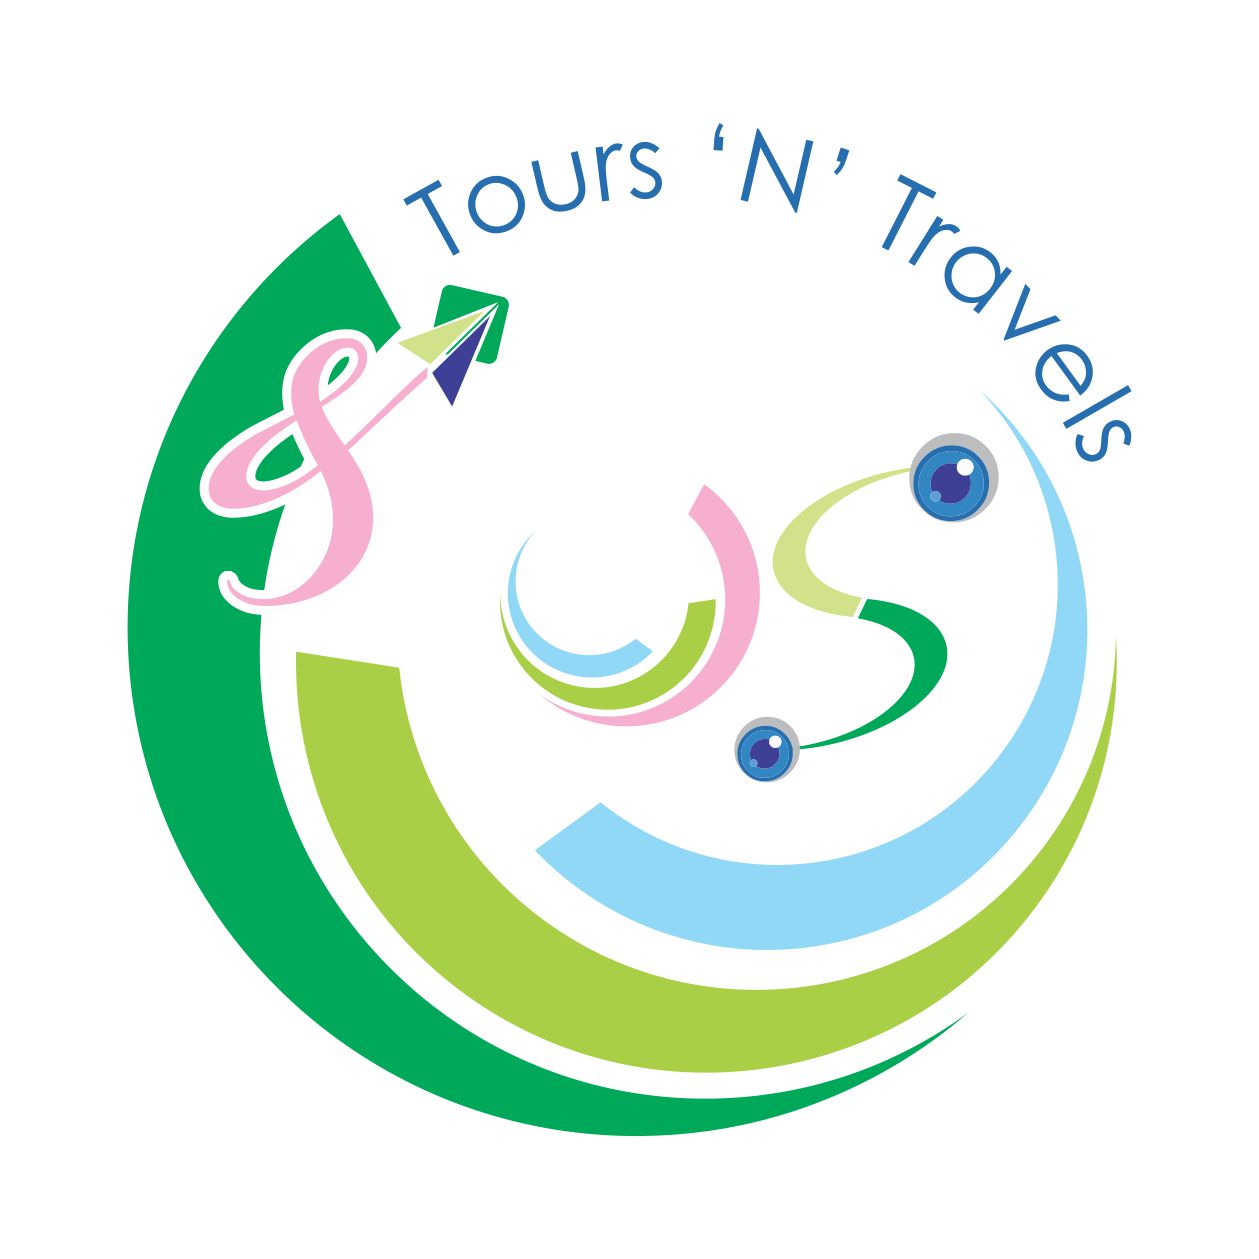 U & Us Tours and Travels